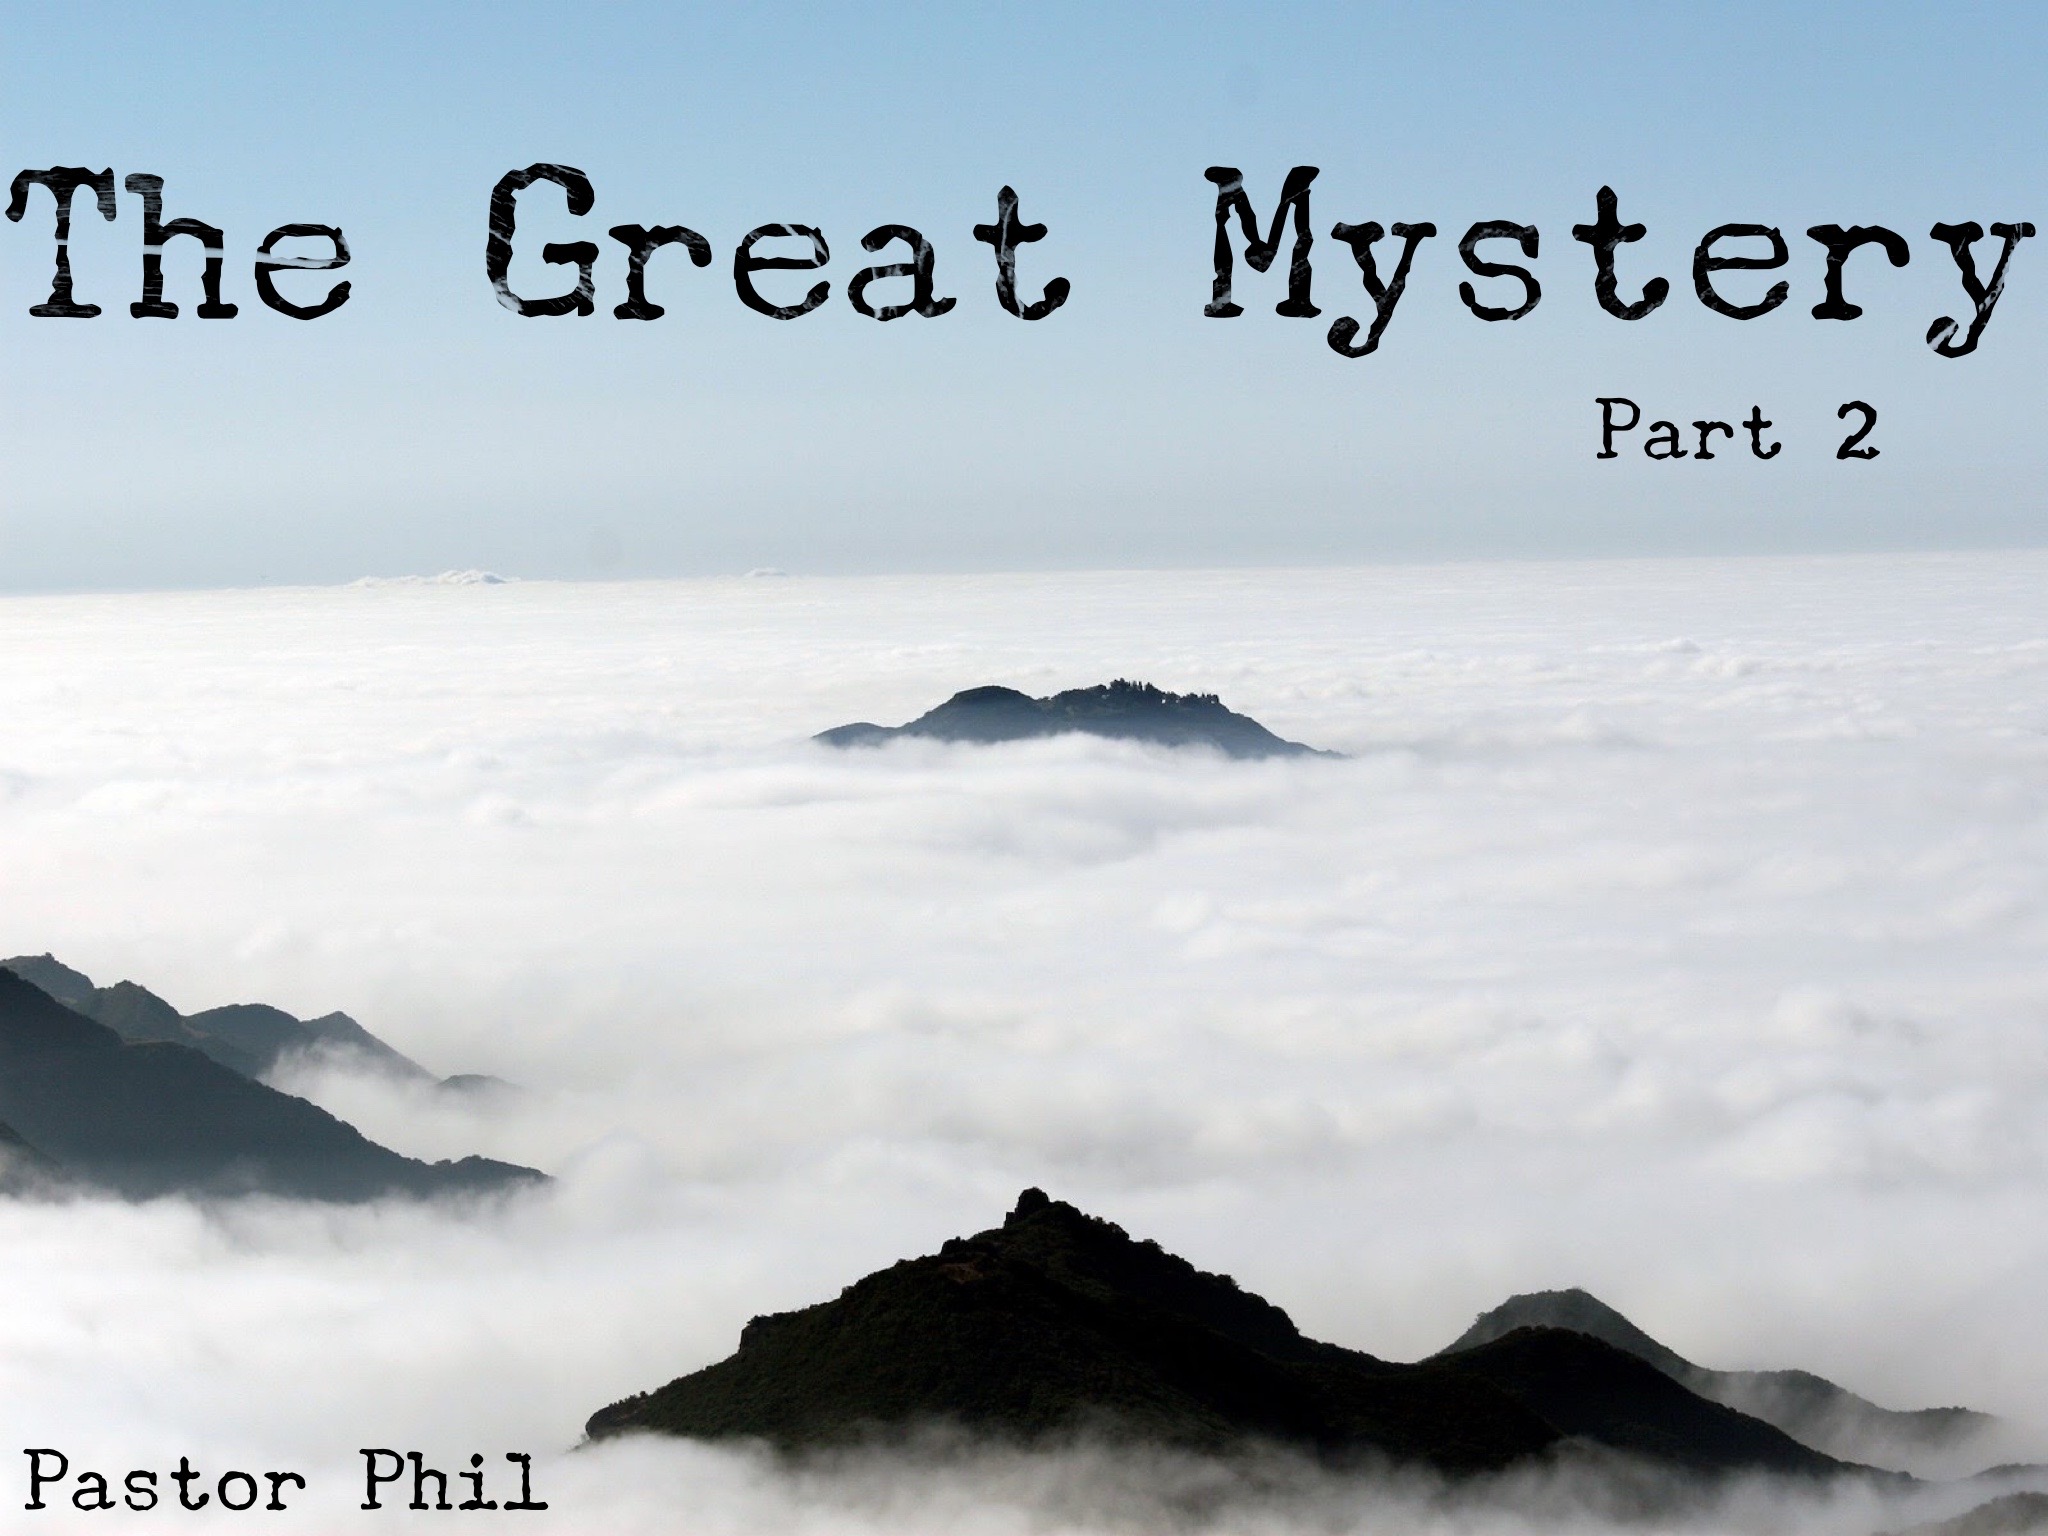 The Great Mystery Pt. 2